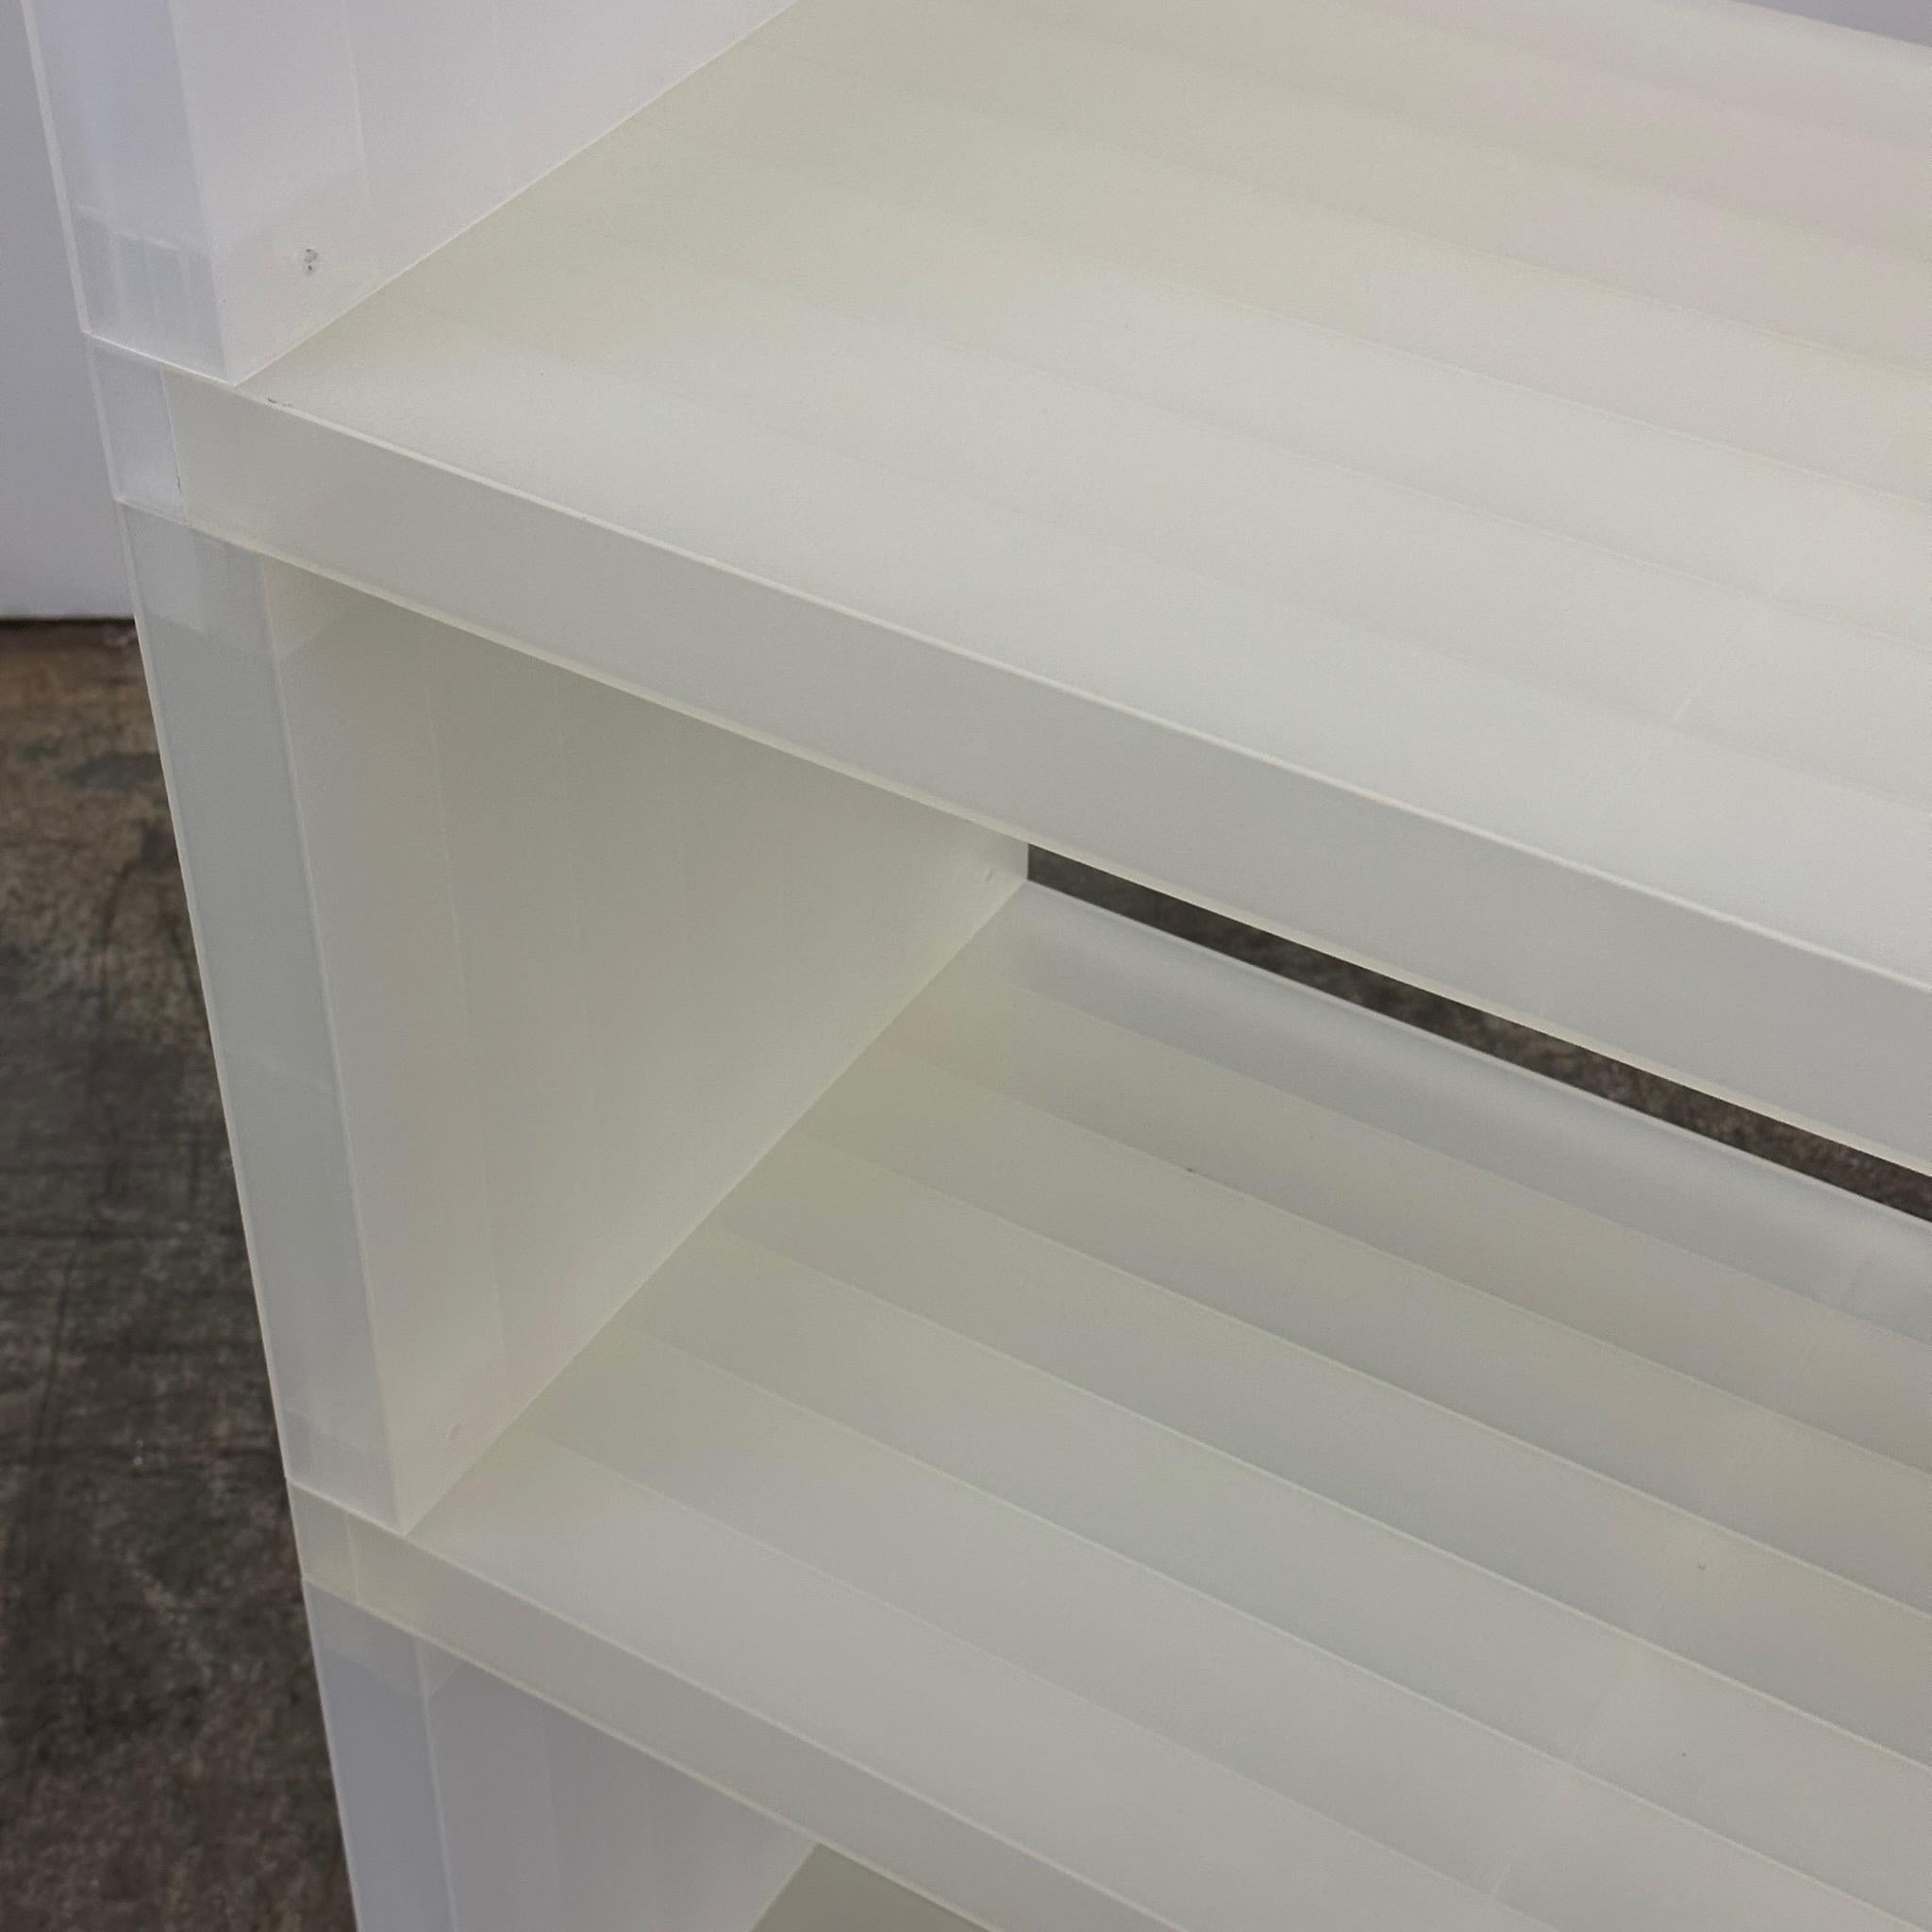 c. 2000s. In the style of the DWR cubitech shelving unit. clear plastic with modular connections so you can change shape.